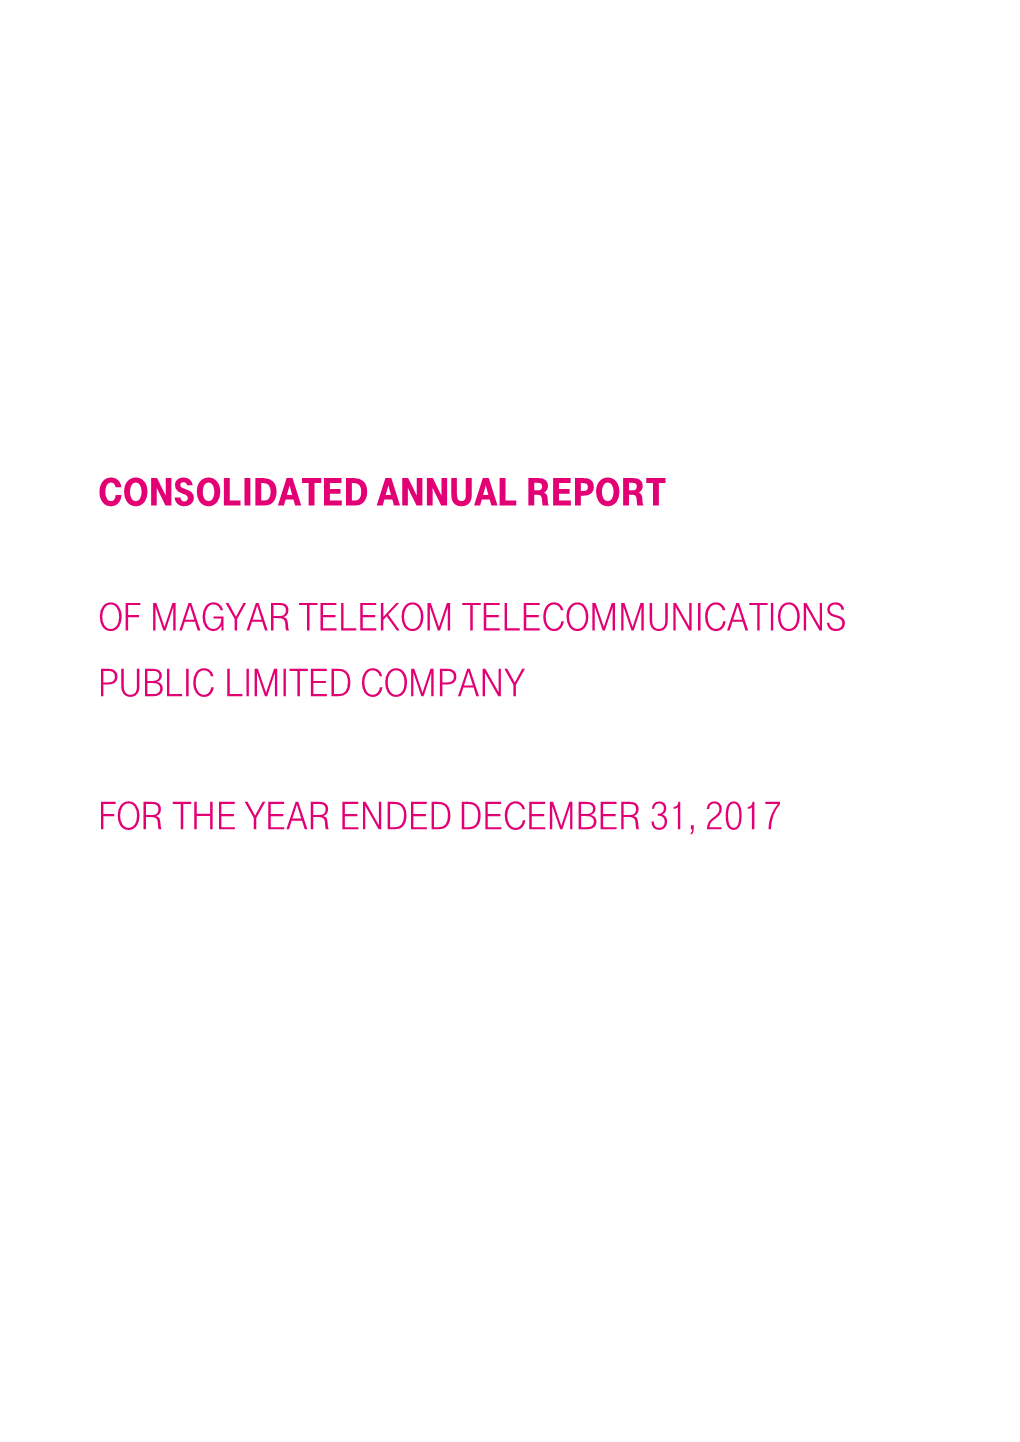 Consolidated Annual Report of Magyar Telekom